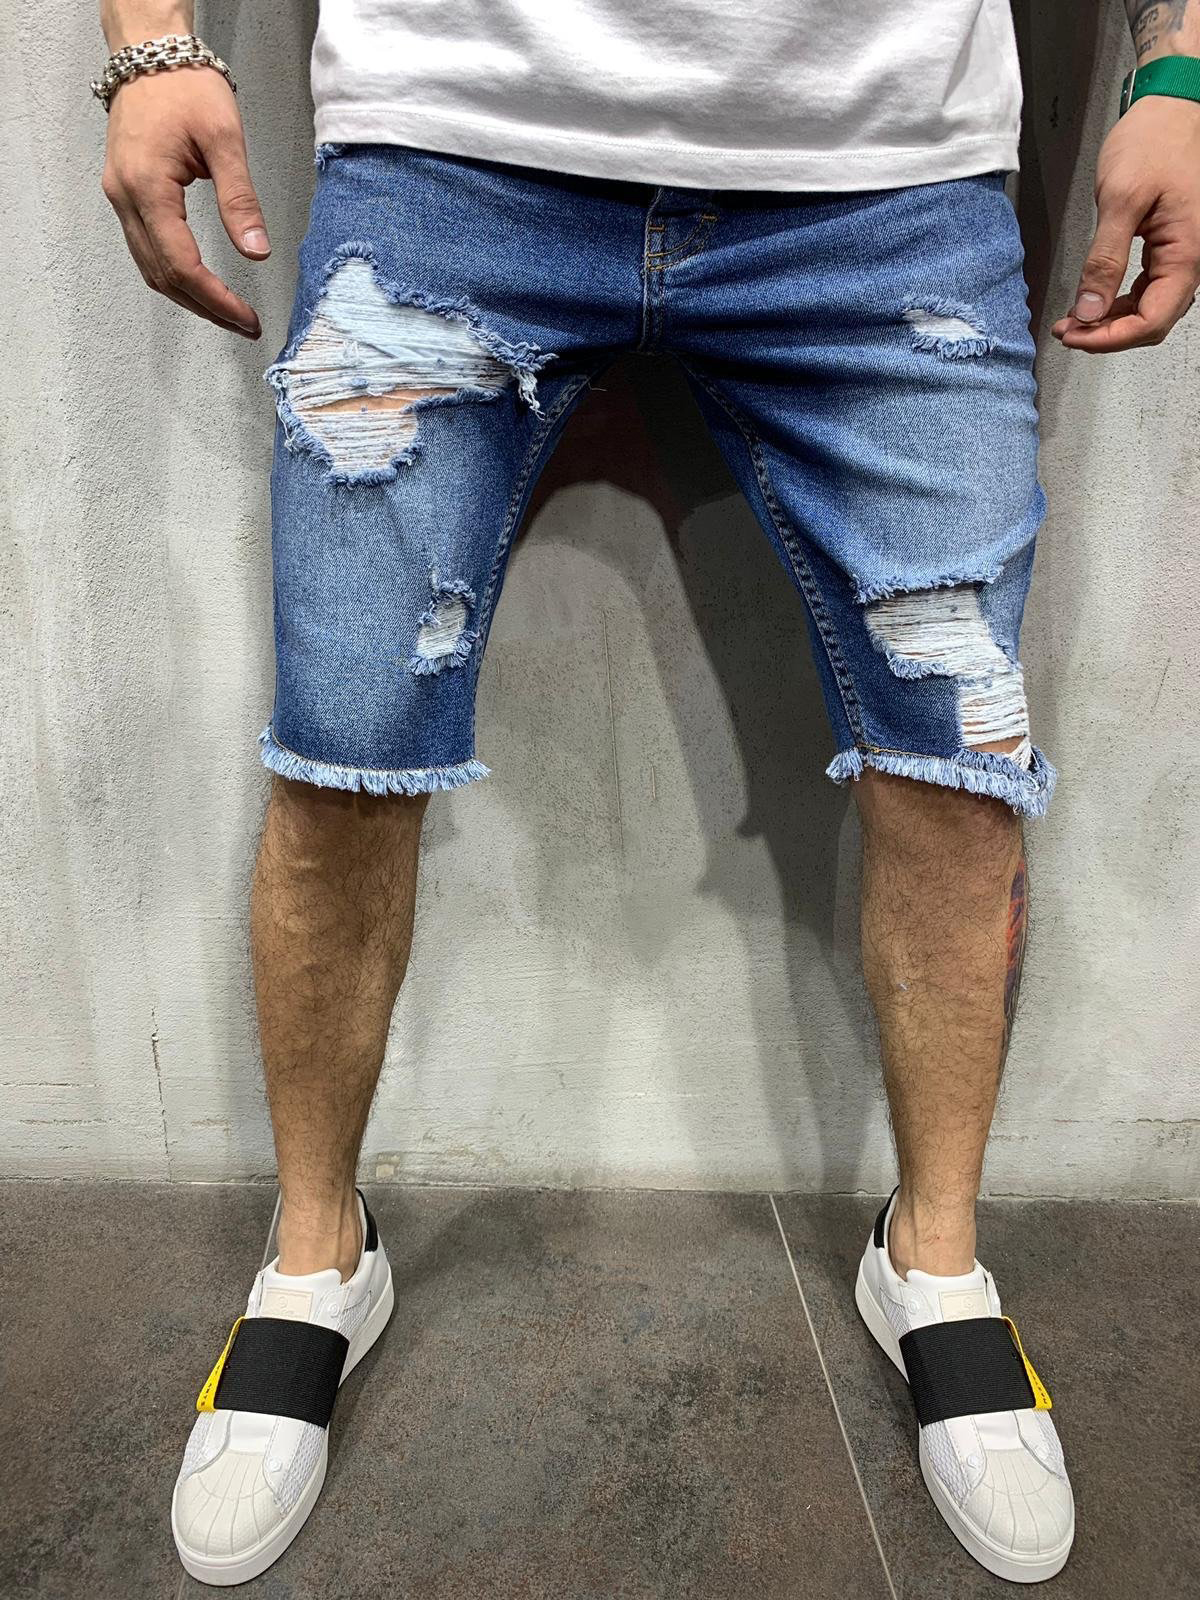 half ripped jeans